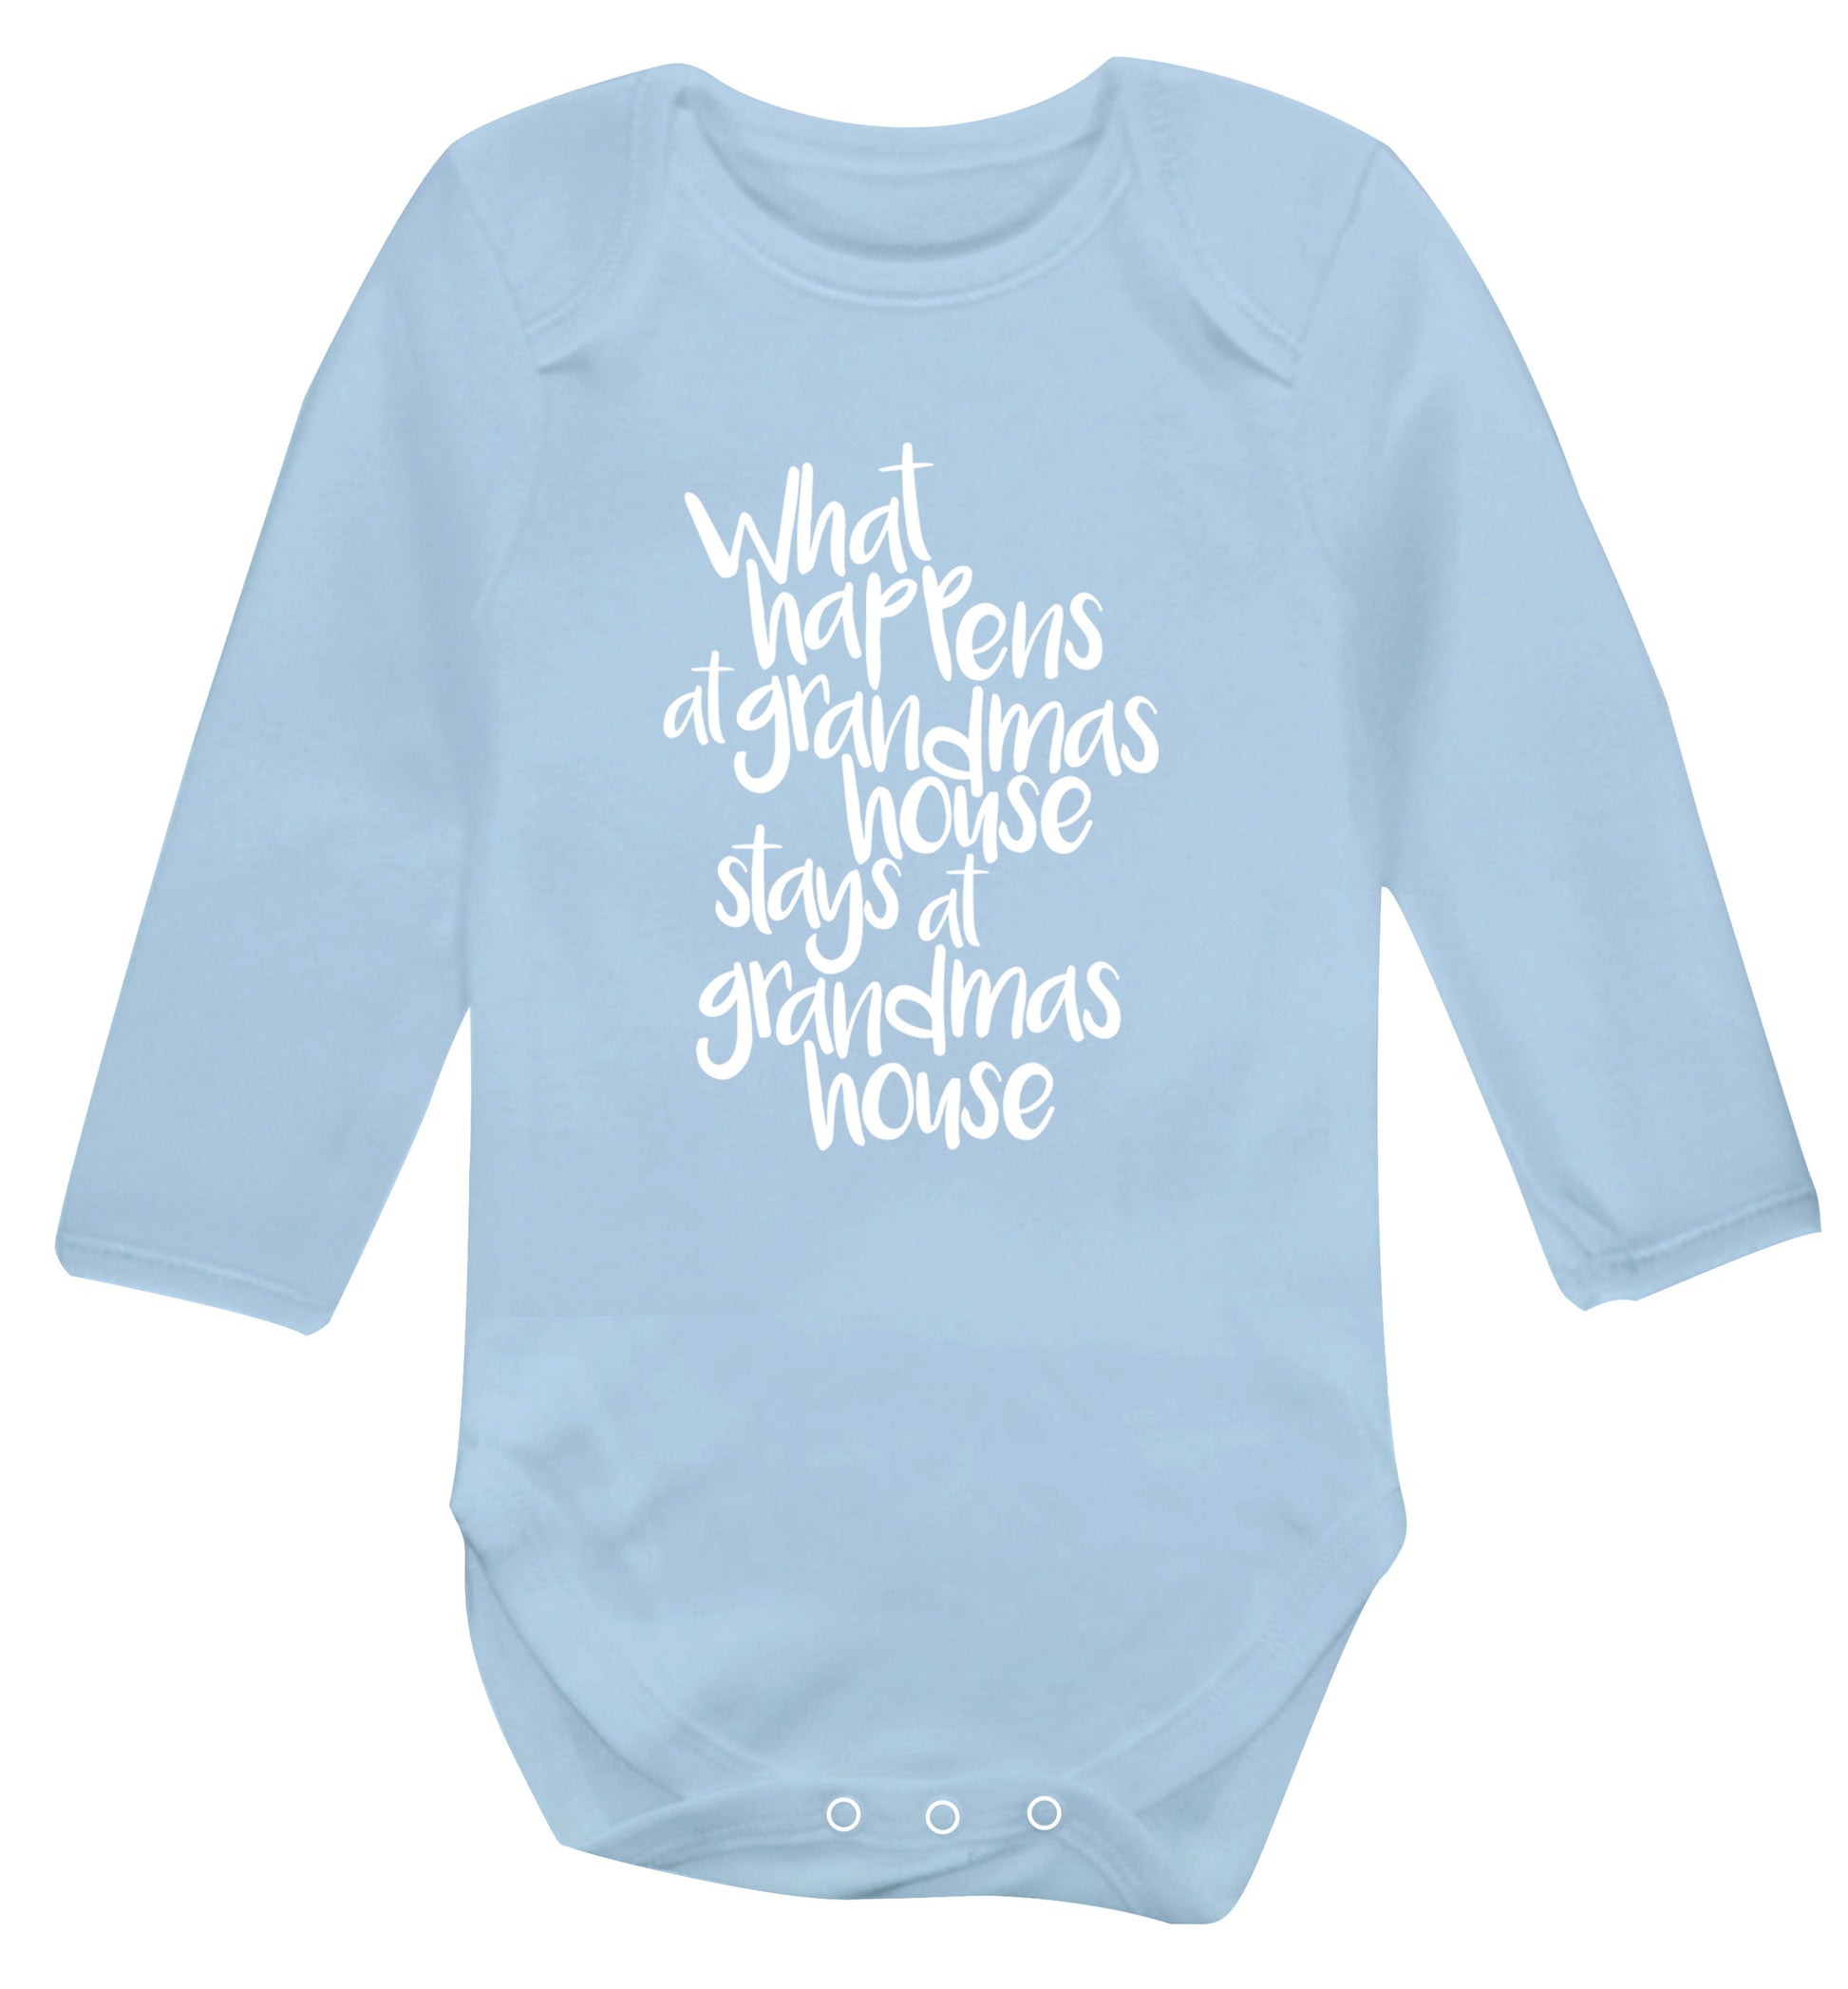 What happens at grandmas house stays at grandmas house Baby Vest long sleeved pale blue 6-12 months